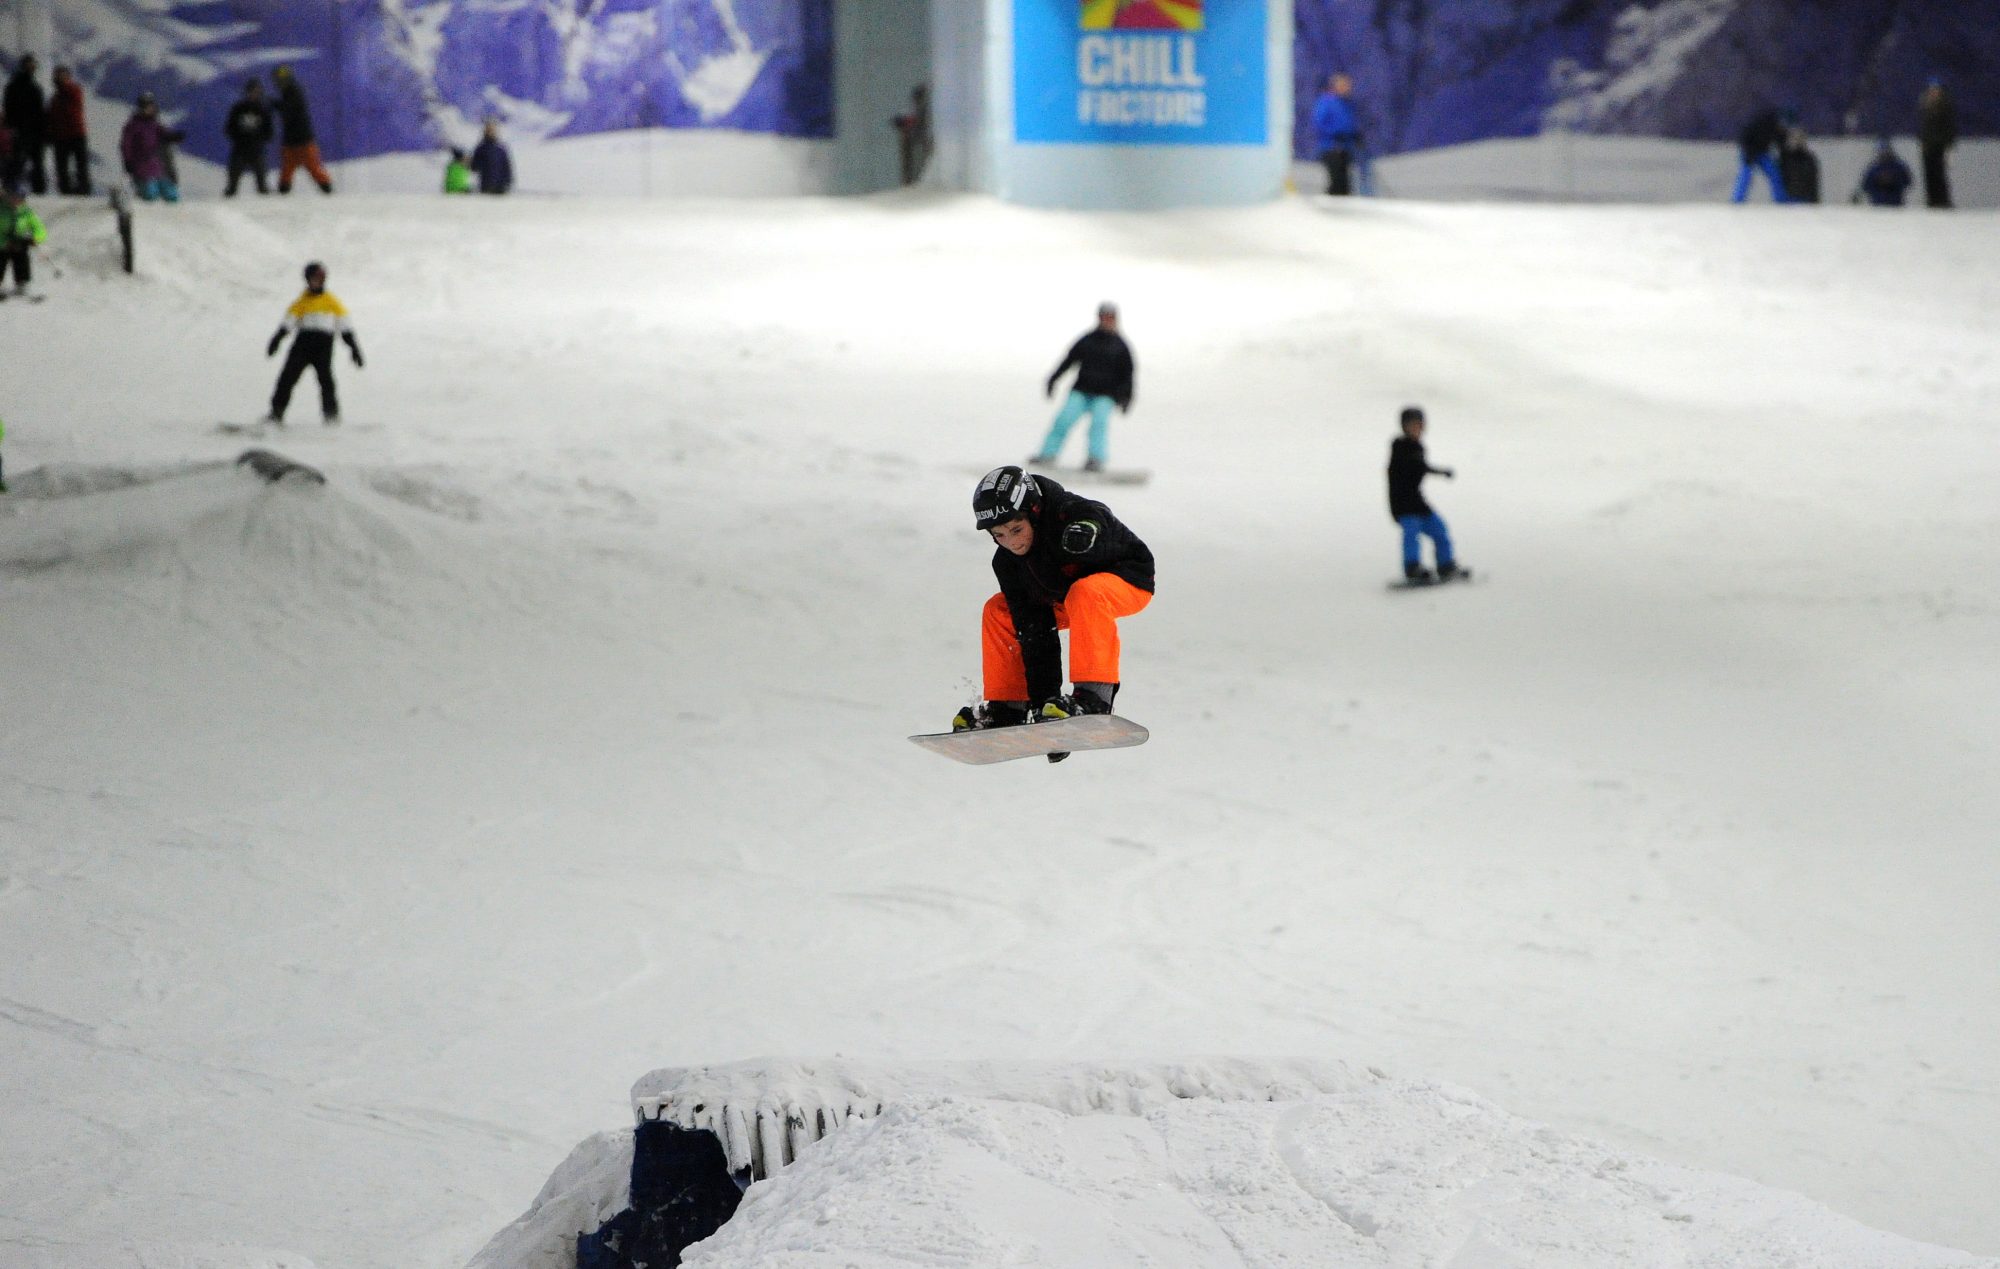 Billy Morgan Meets Promising Young Talent At Launch of Chill Factore Terrain Challenges